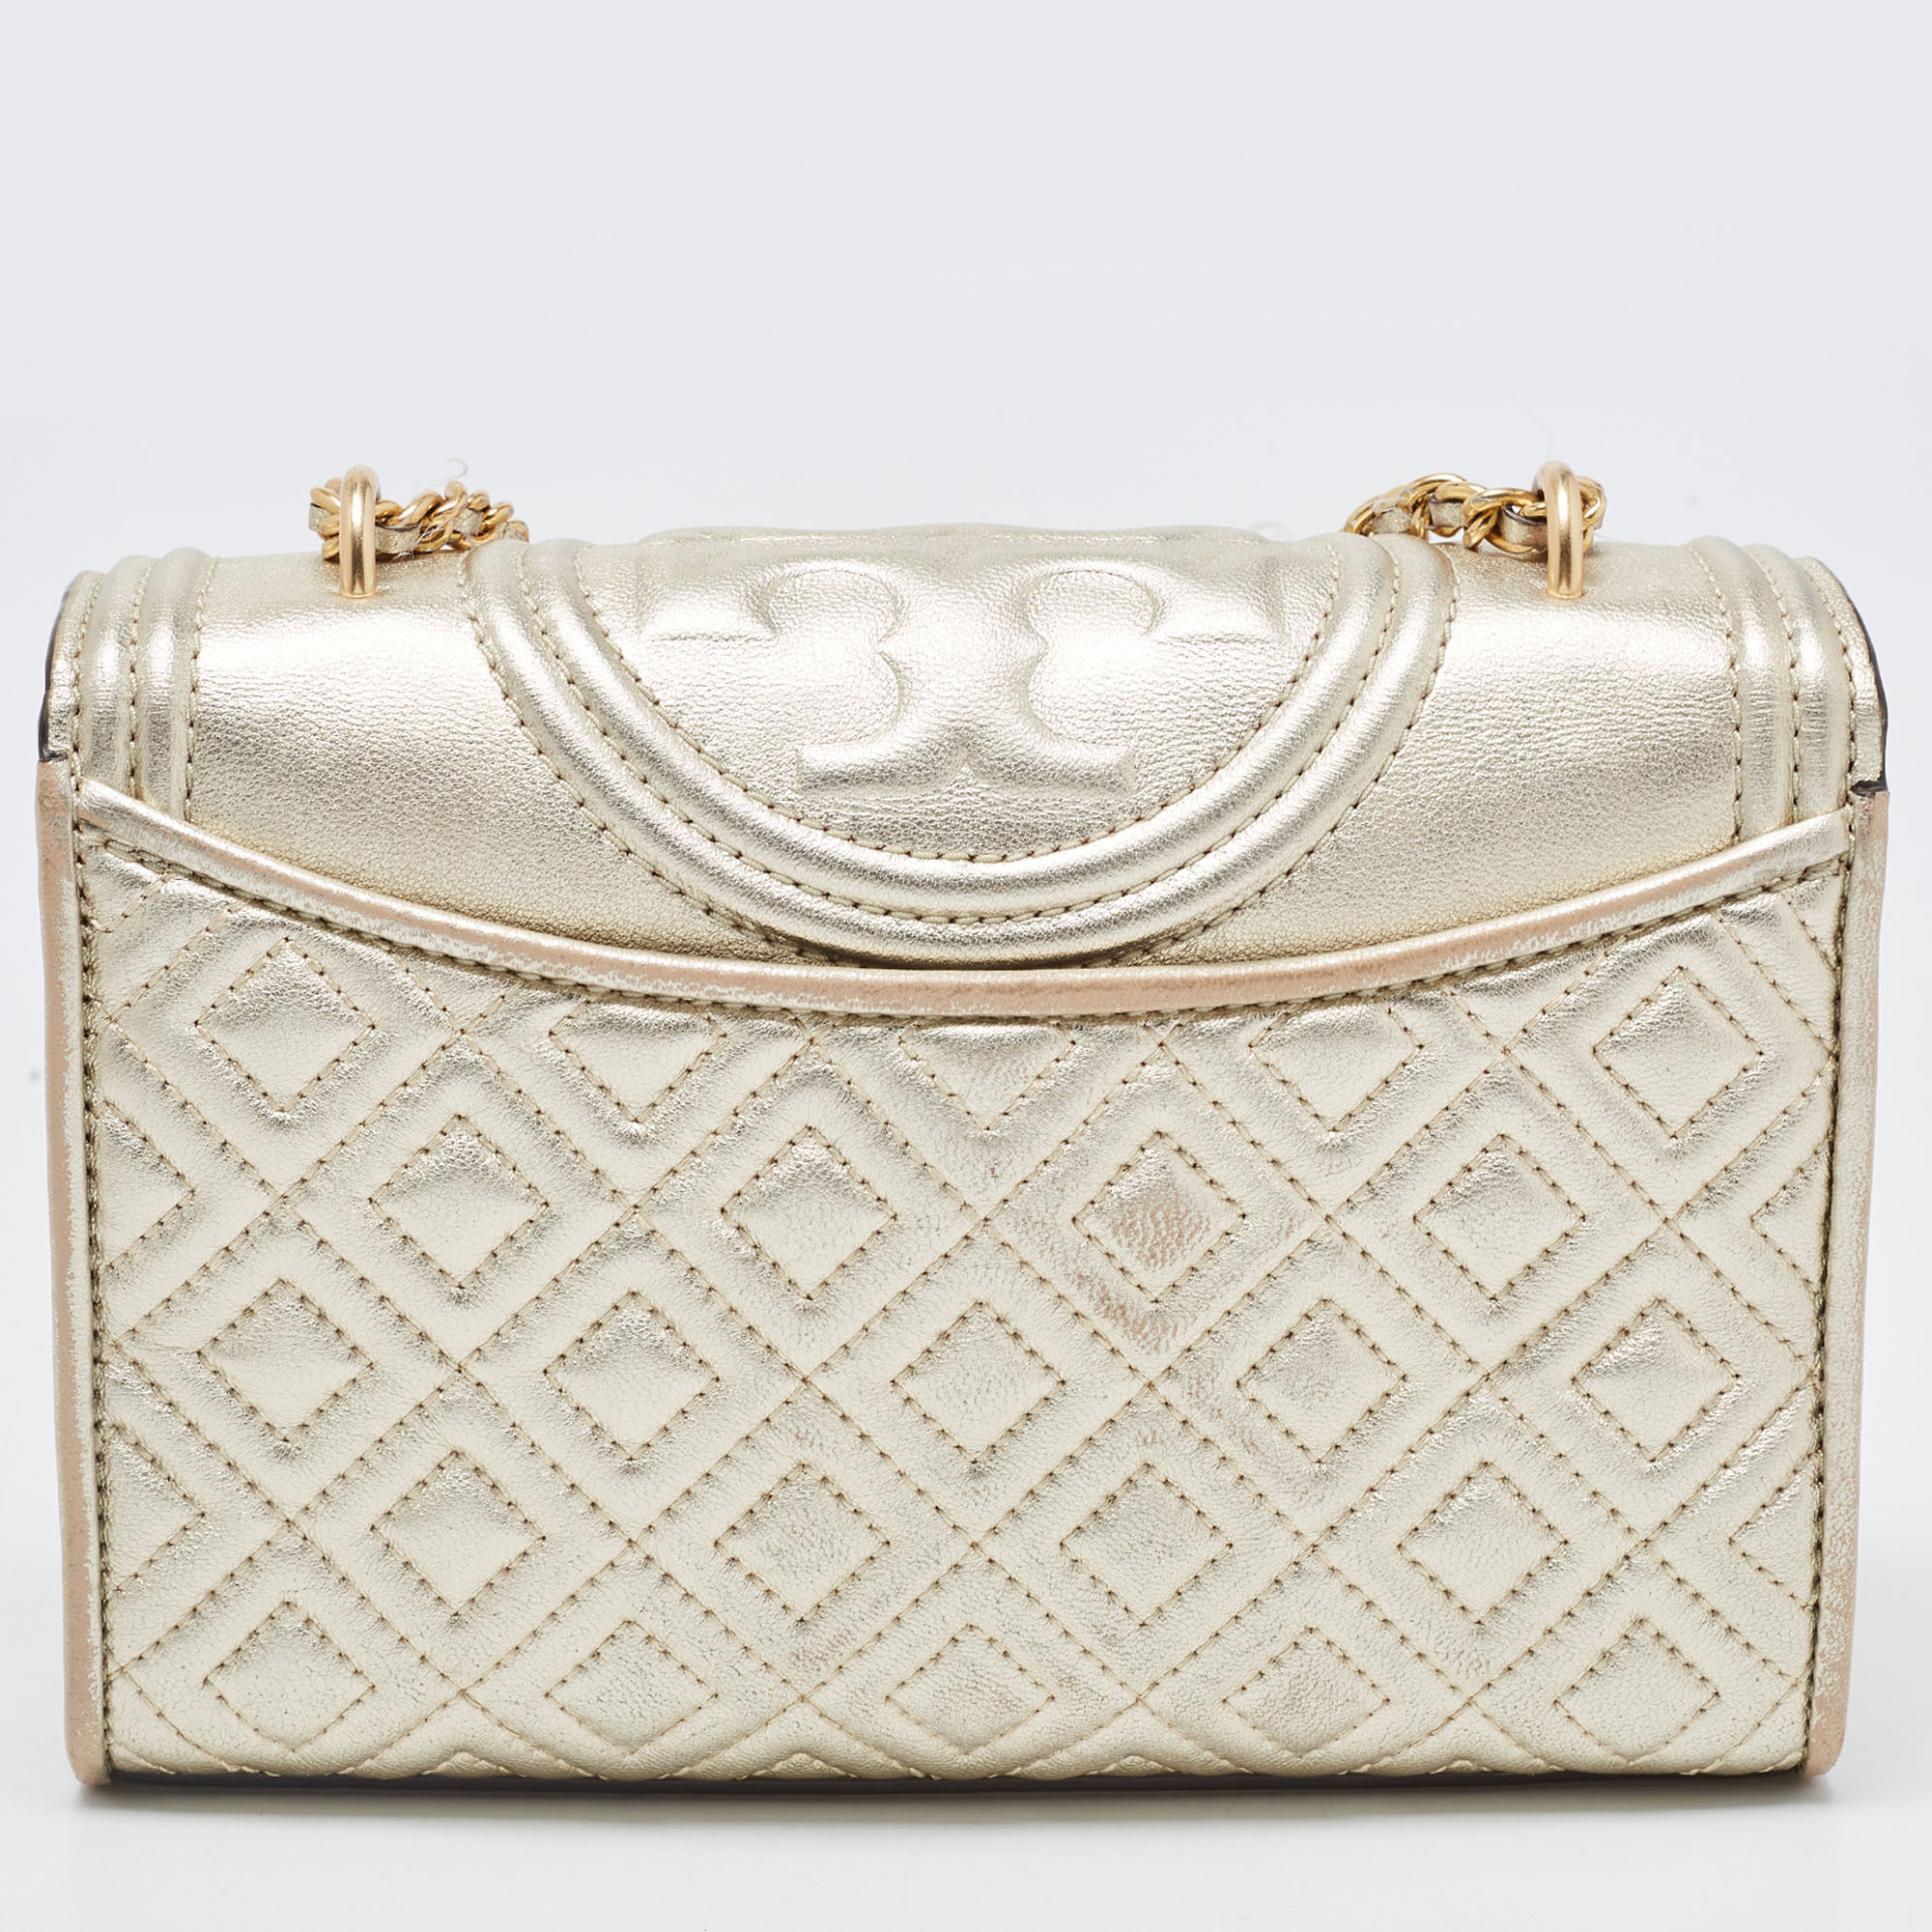 Tory Burch Gold Leather Small Fleming Shoulder Bag